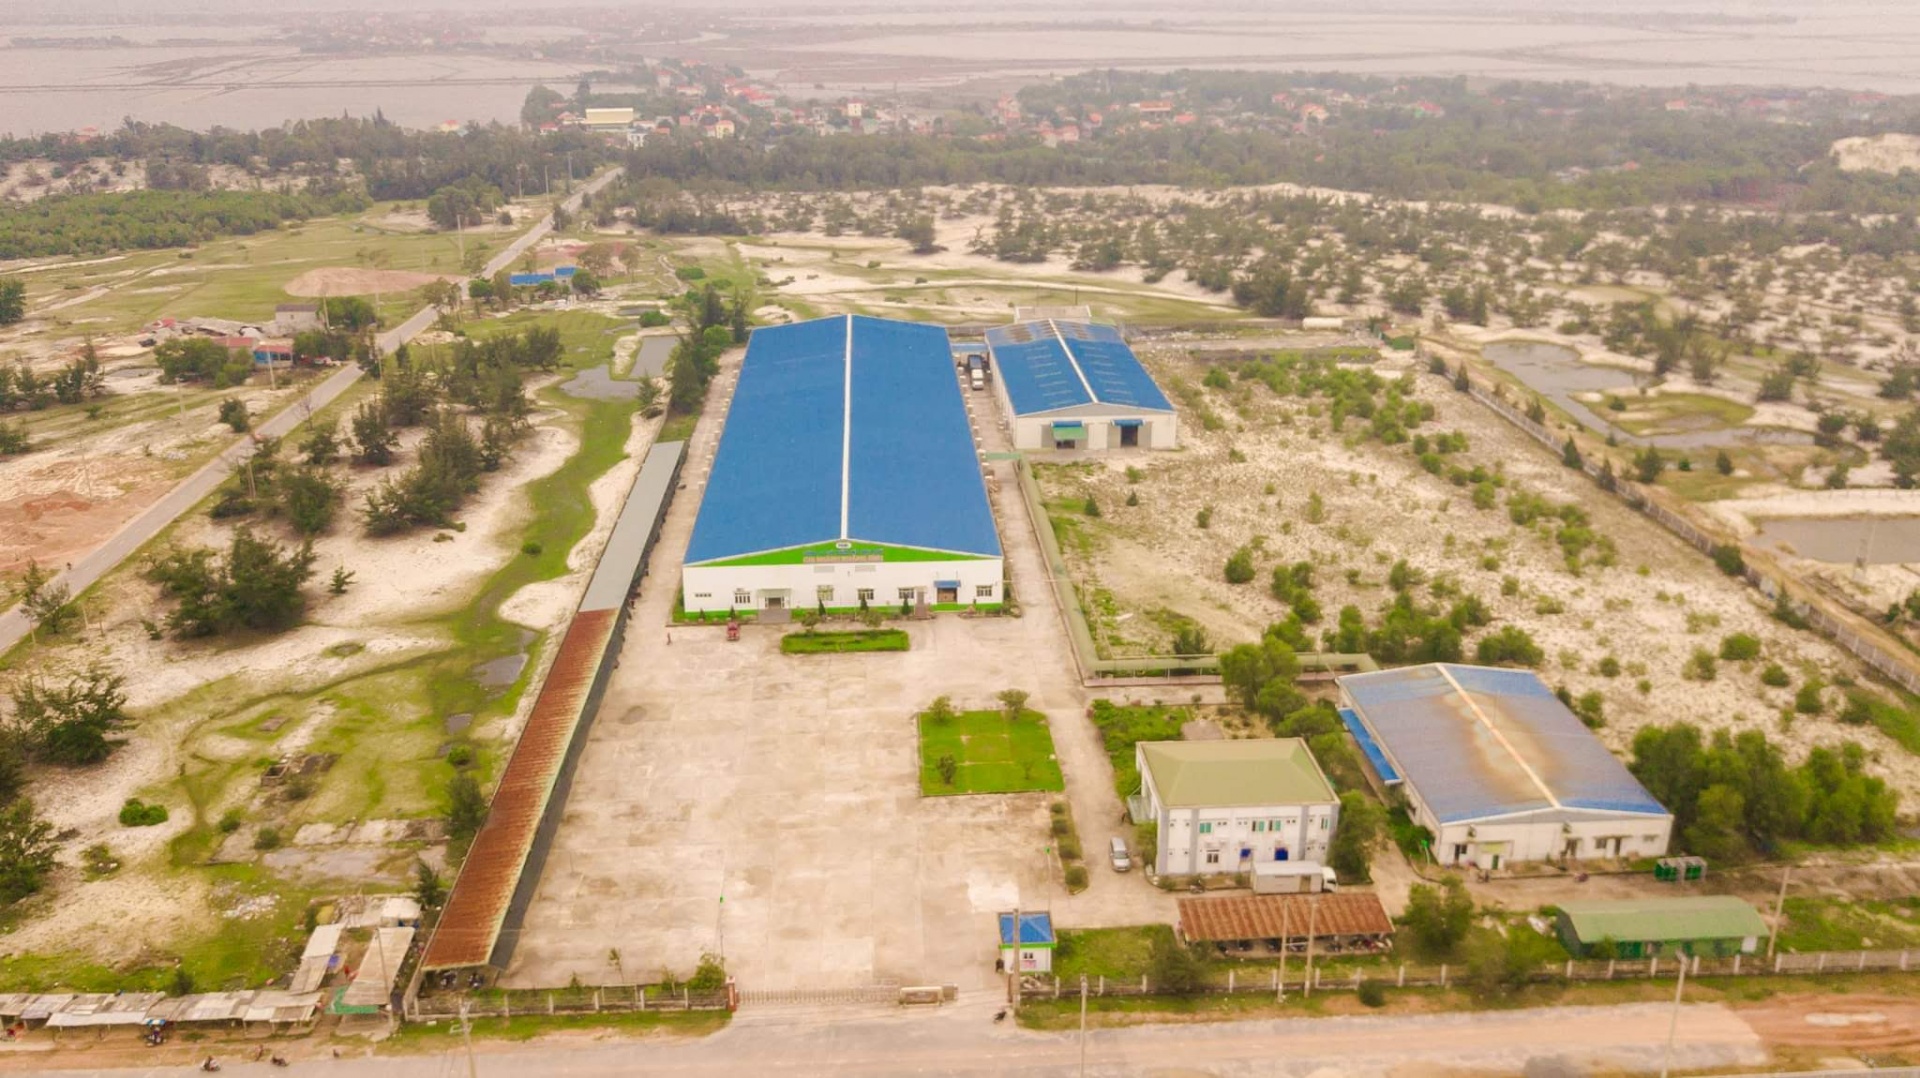 Quang Binh develops manufacturing into a key sector